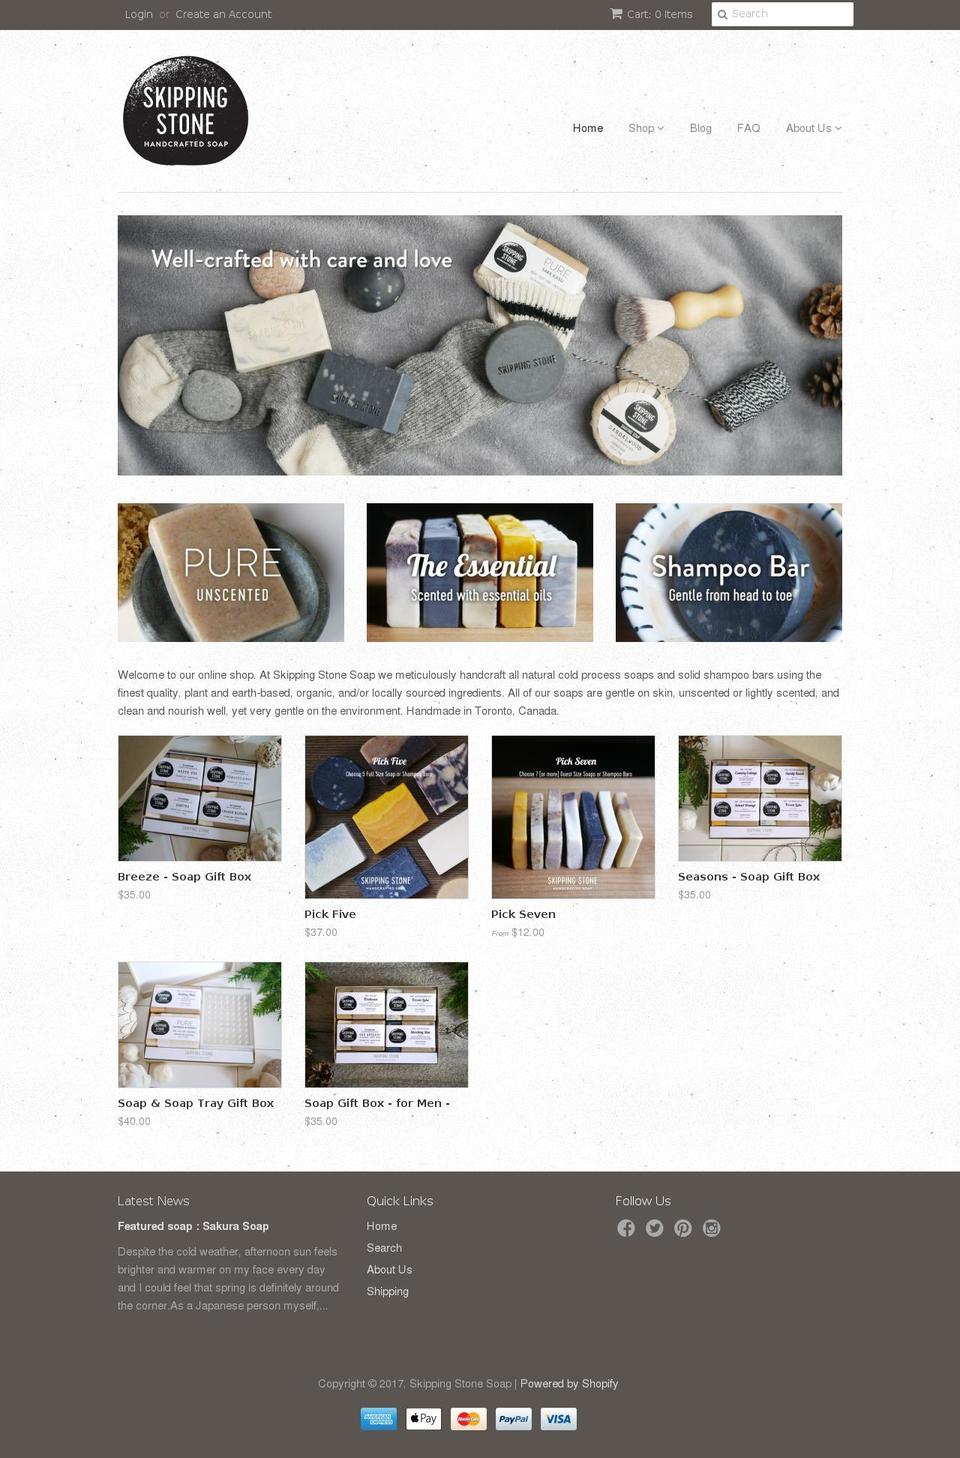 Craft Shopify theme site example skippingstonesoap.com